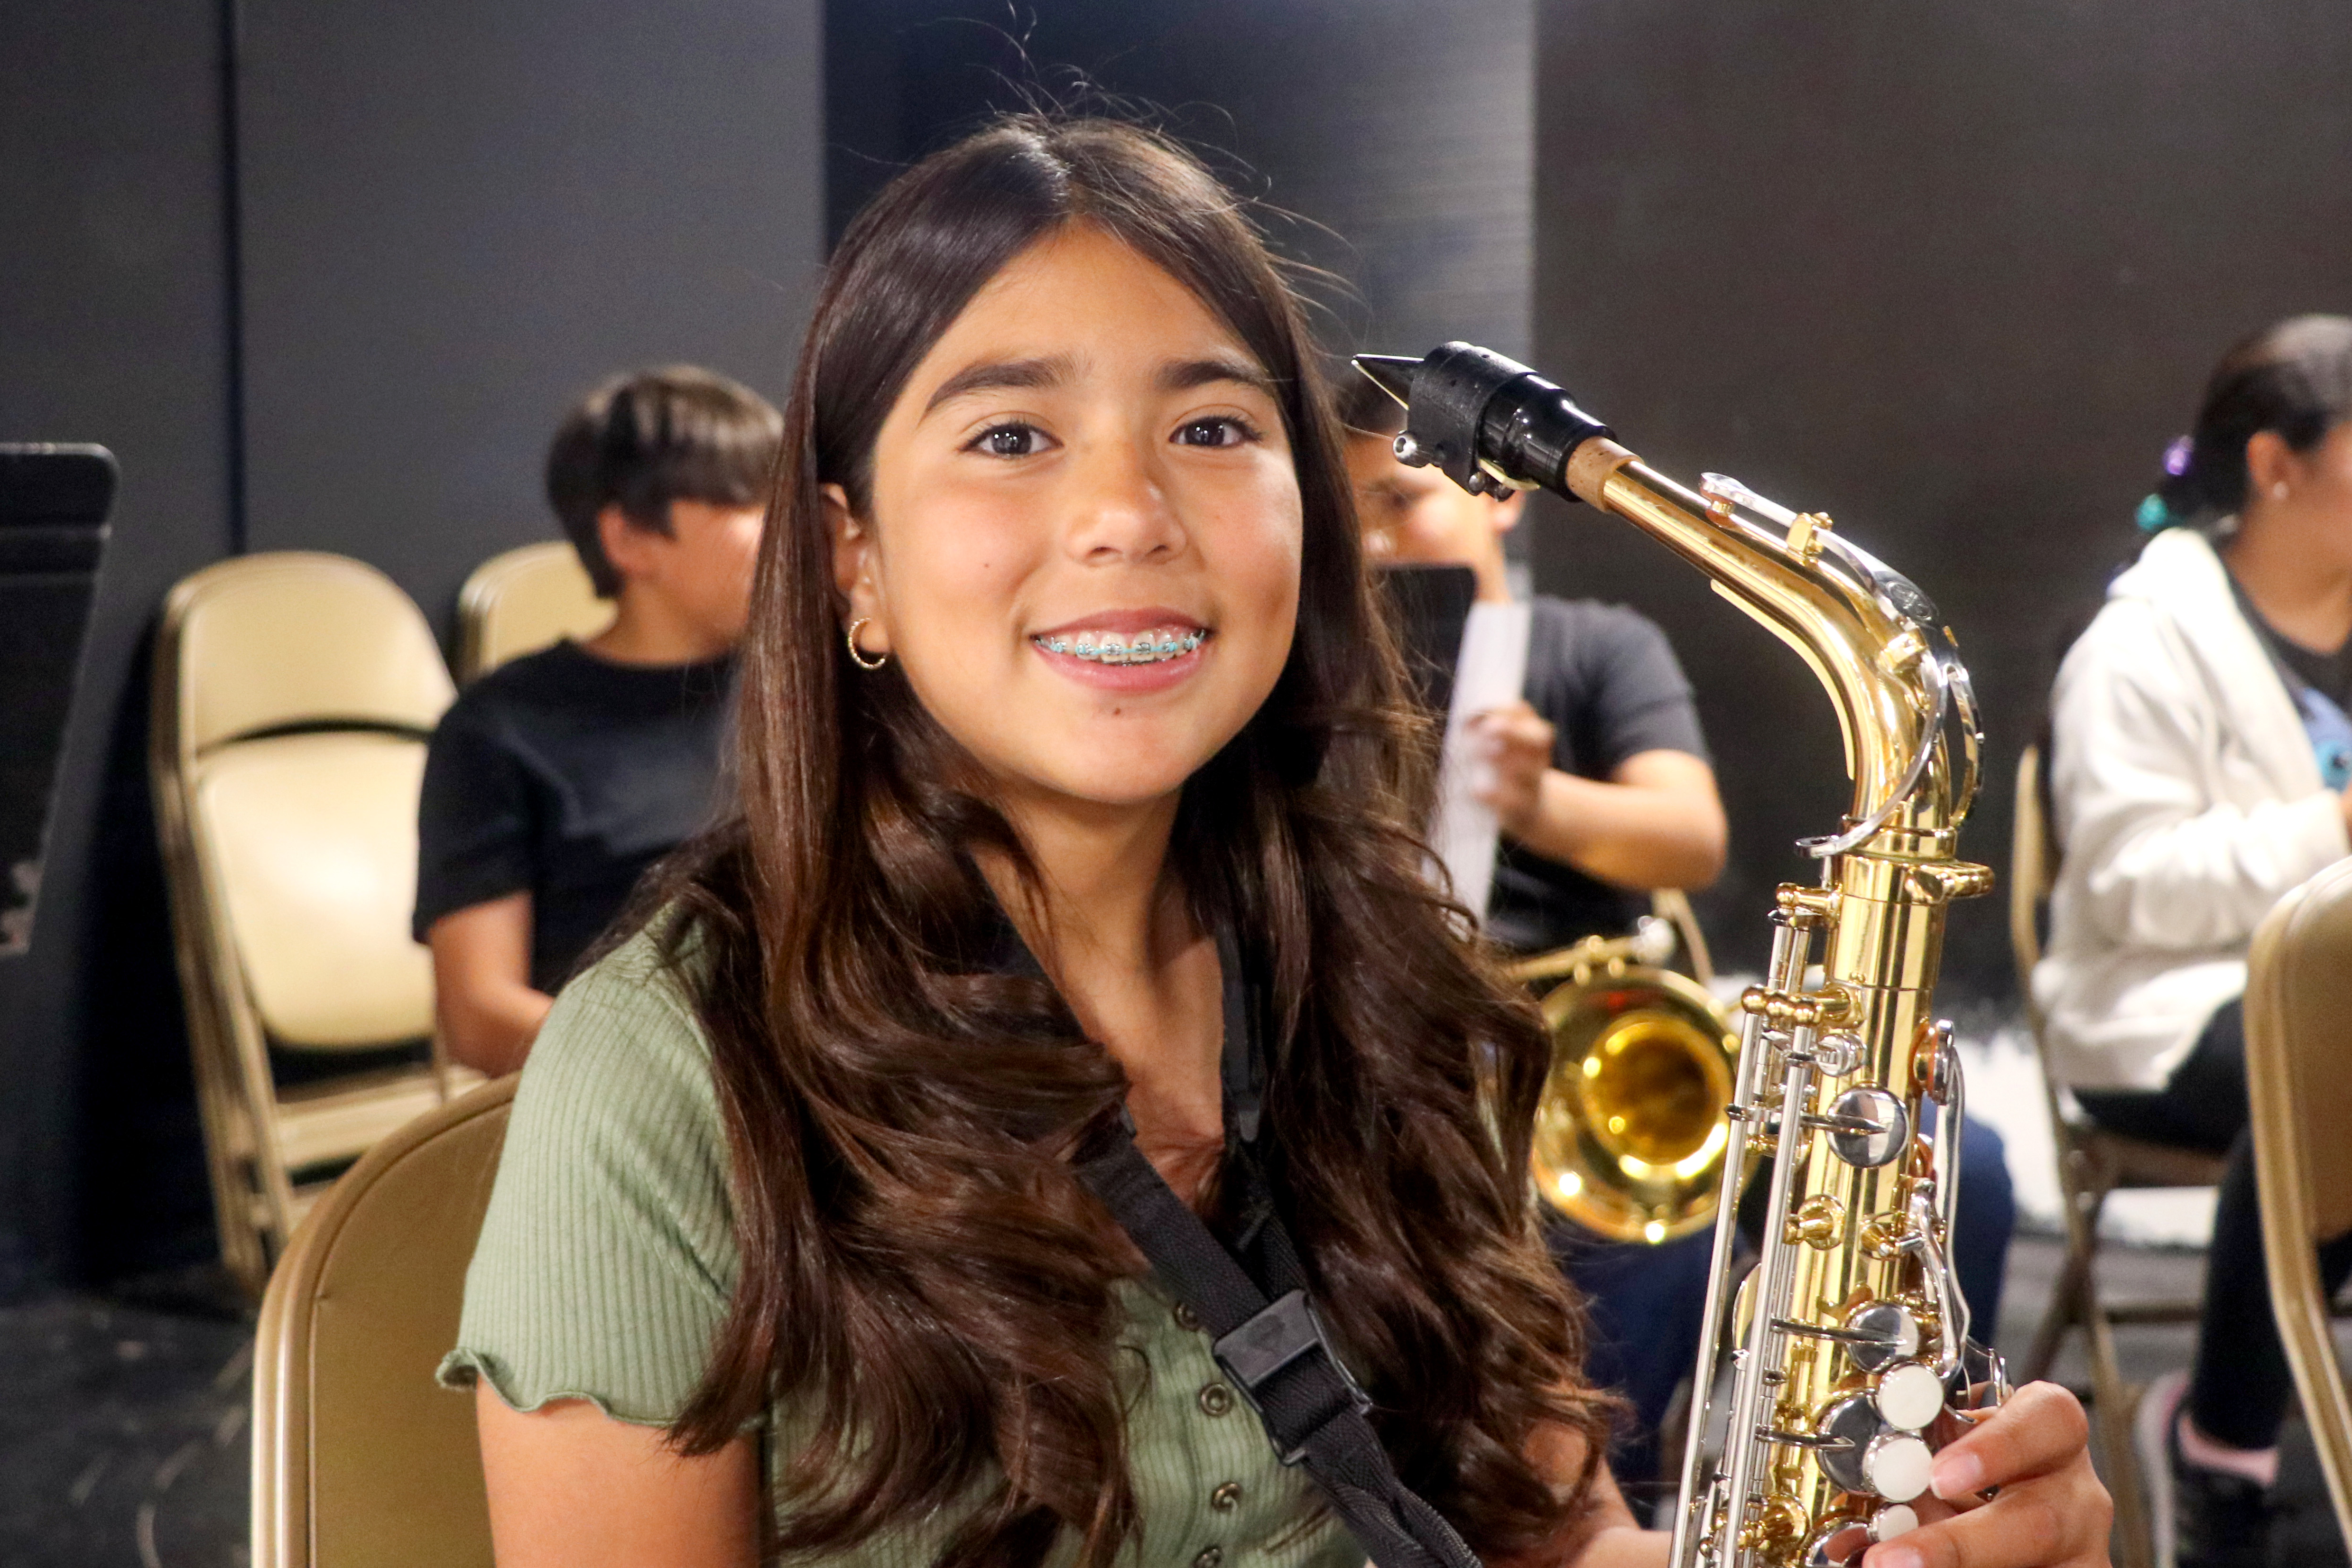 A young girl smiles while holding a saxophone. holding her 